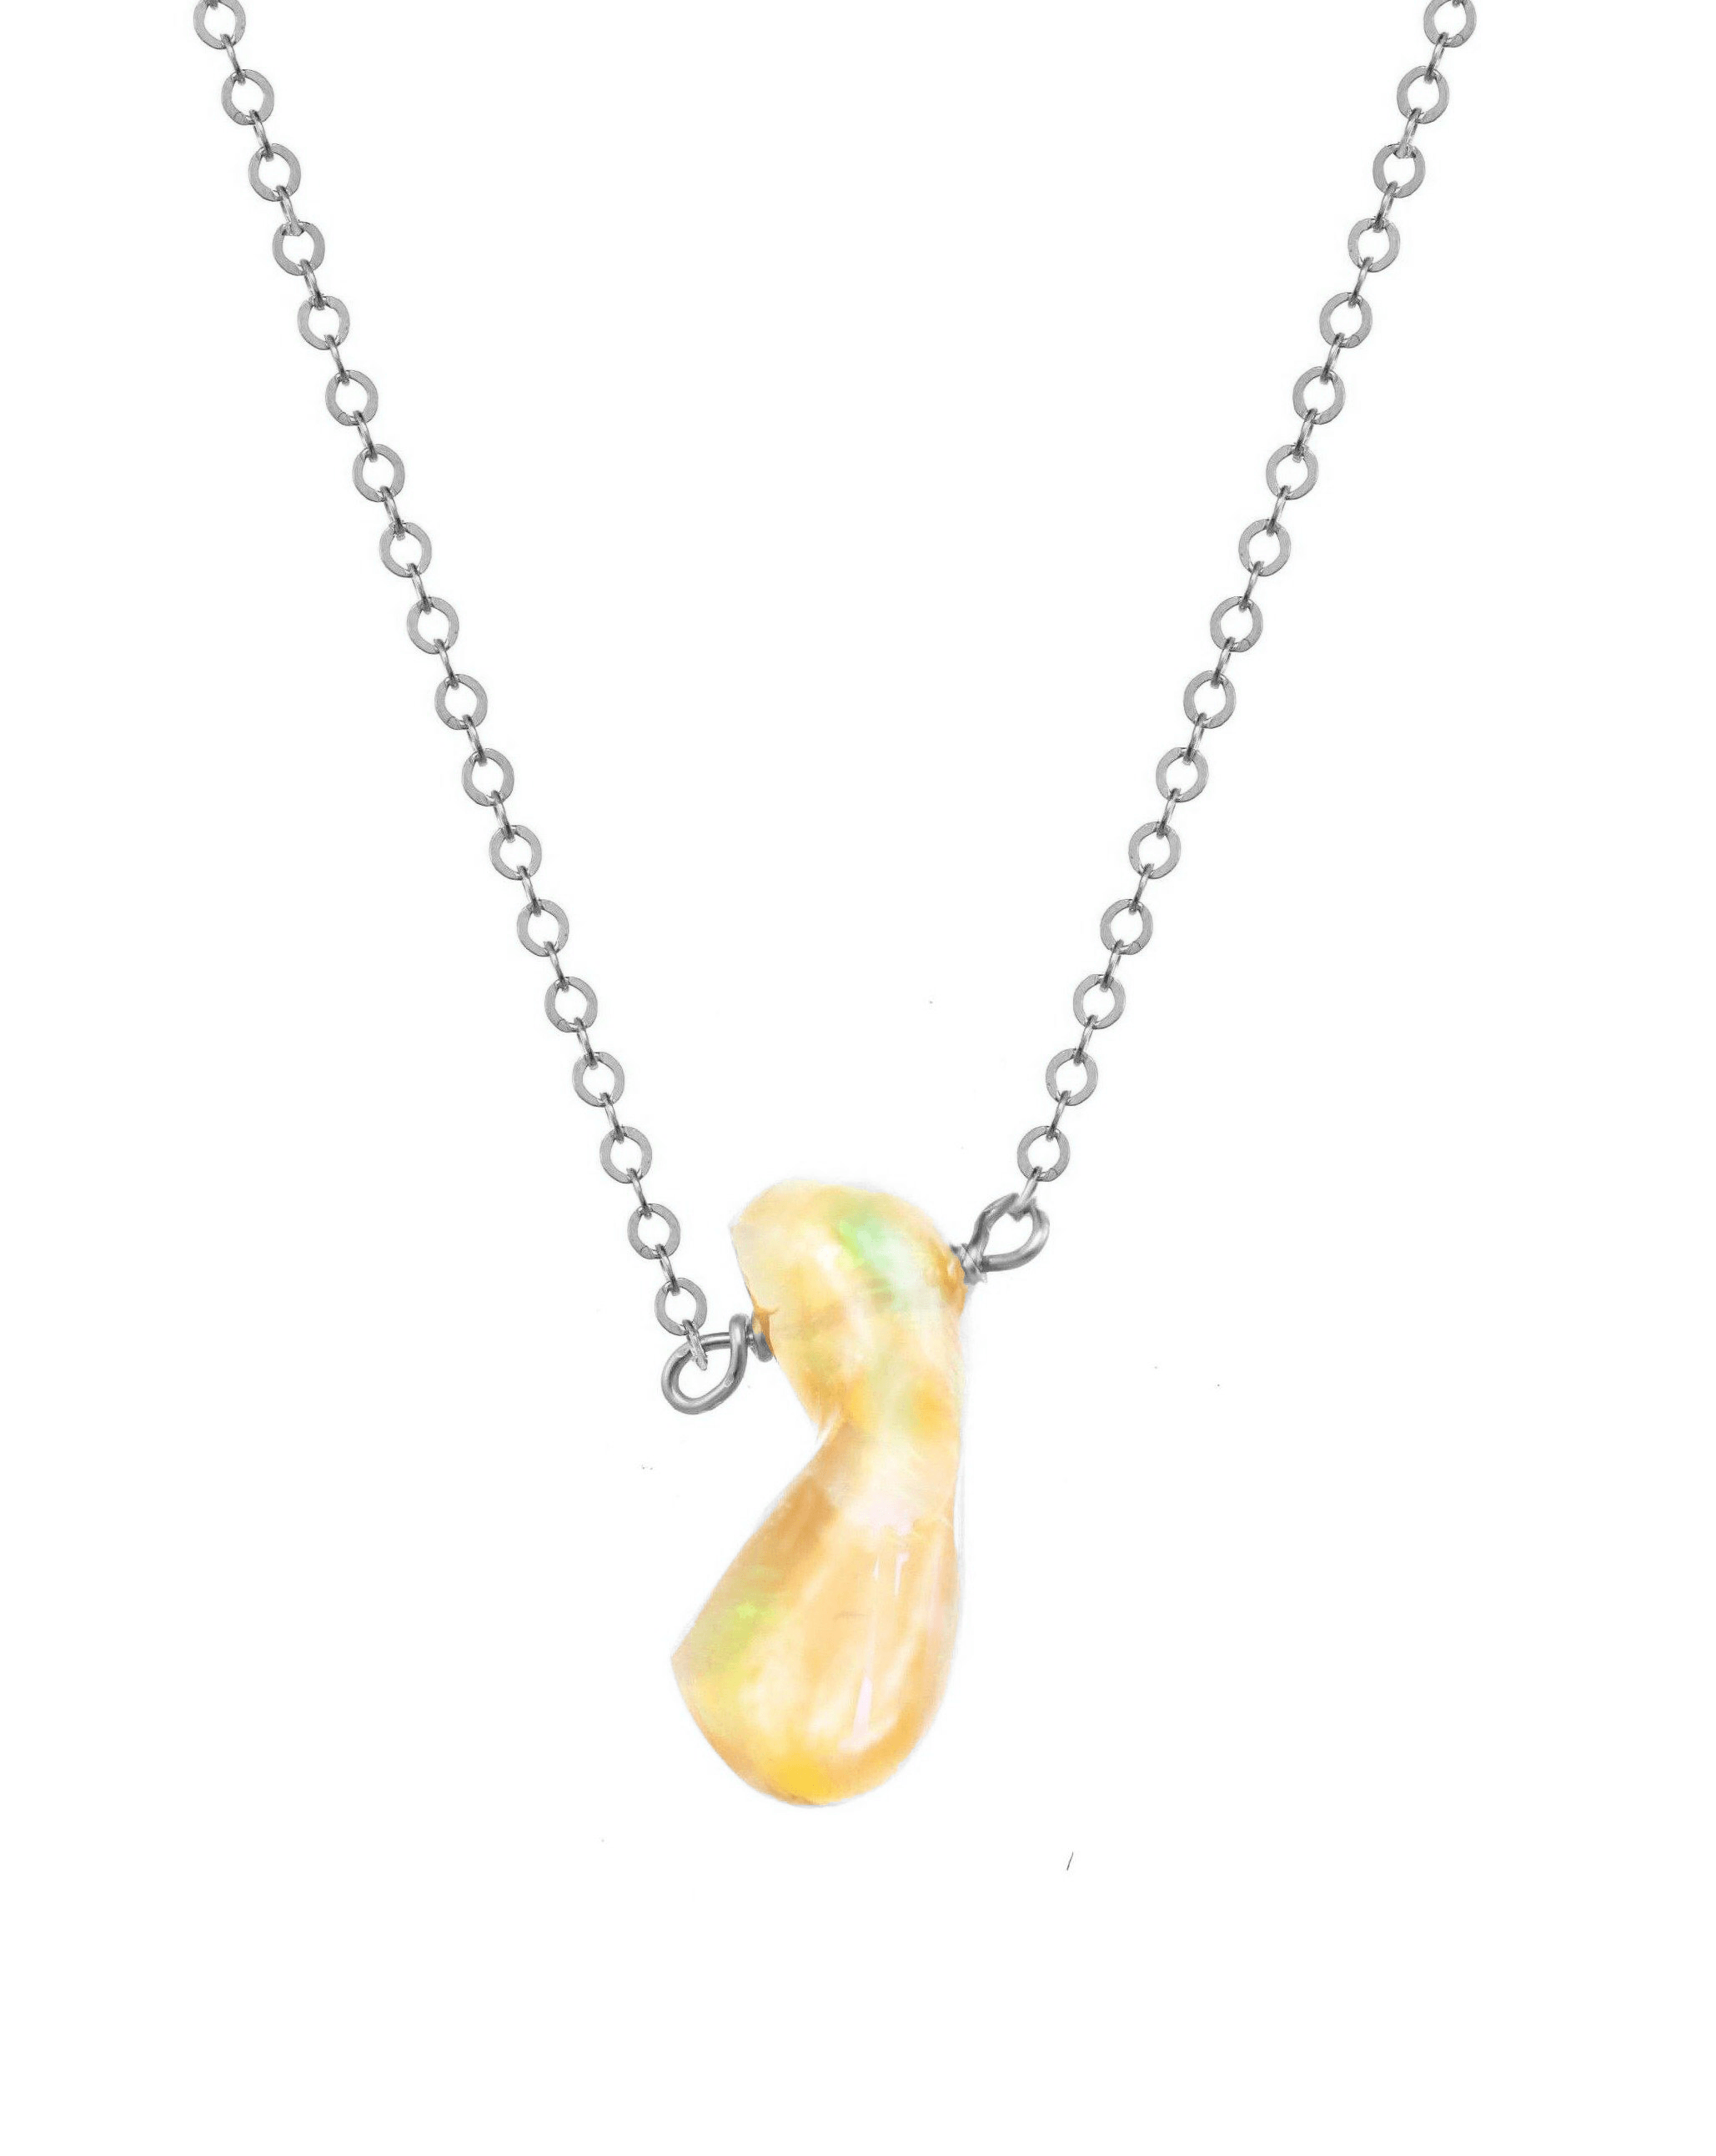 Cameena Necklace by KOZAKH. A 16 inch long necklace in Sterling Silver, featuring an irregular AAA+ Ethiopian Opal.